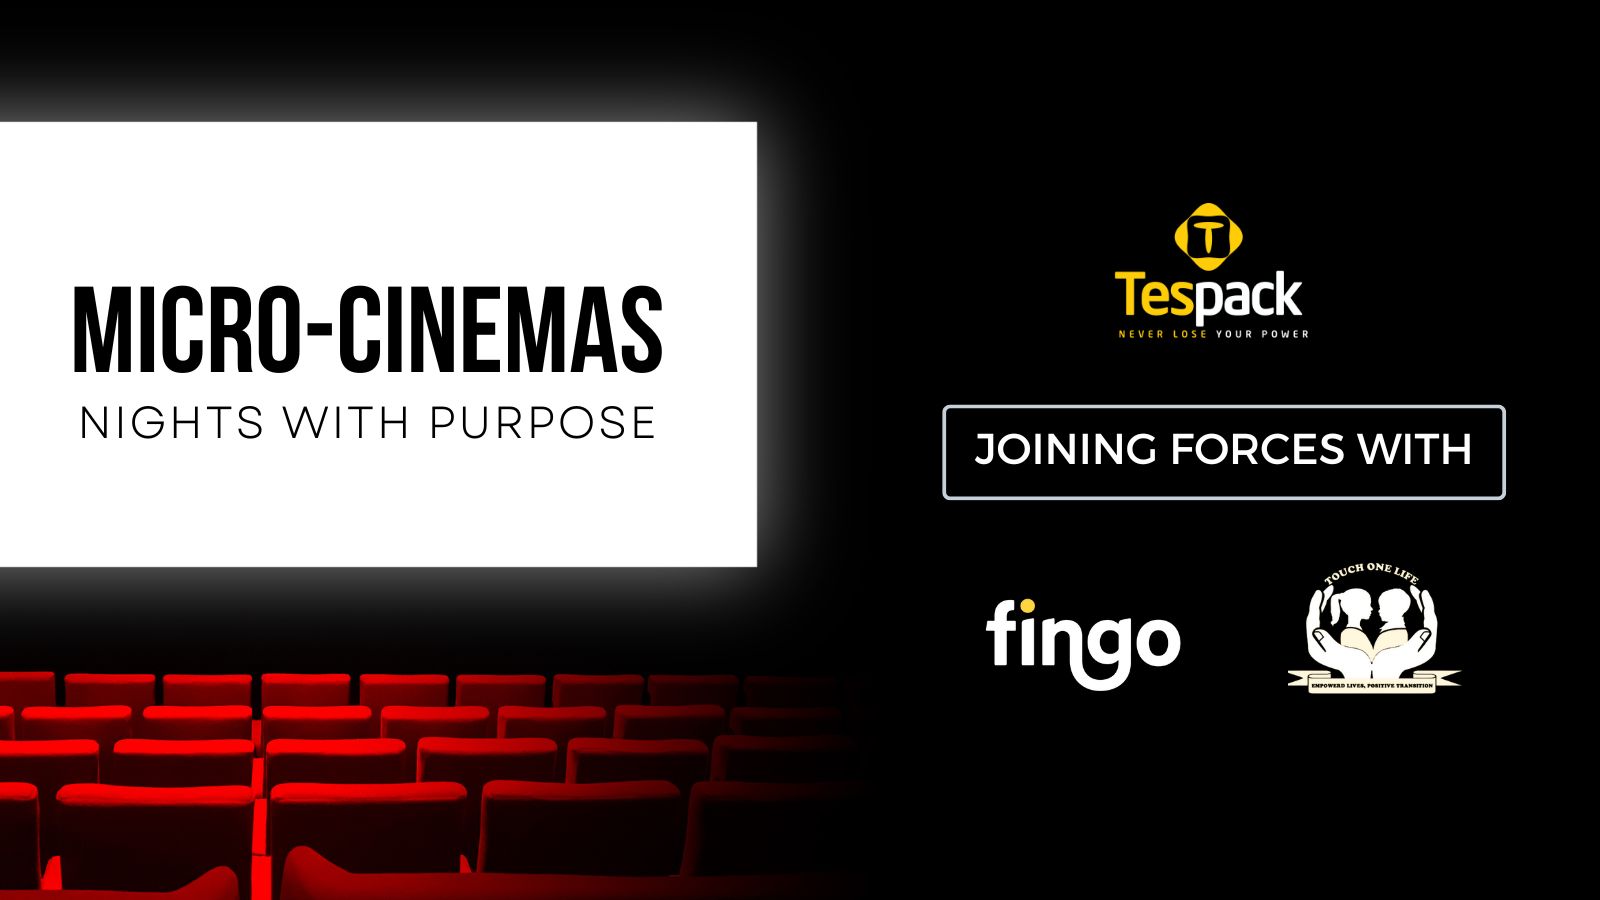 Tespack Powering Micro-Cinema Nights with Purpose Joining Forces with TOLK (Touch One Life Kenya) and Fingo